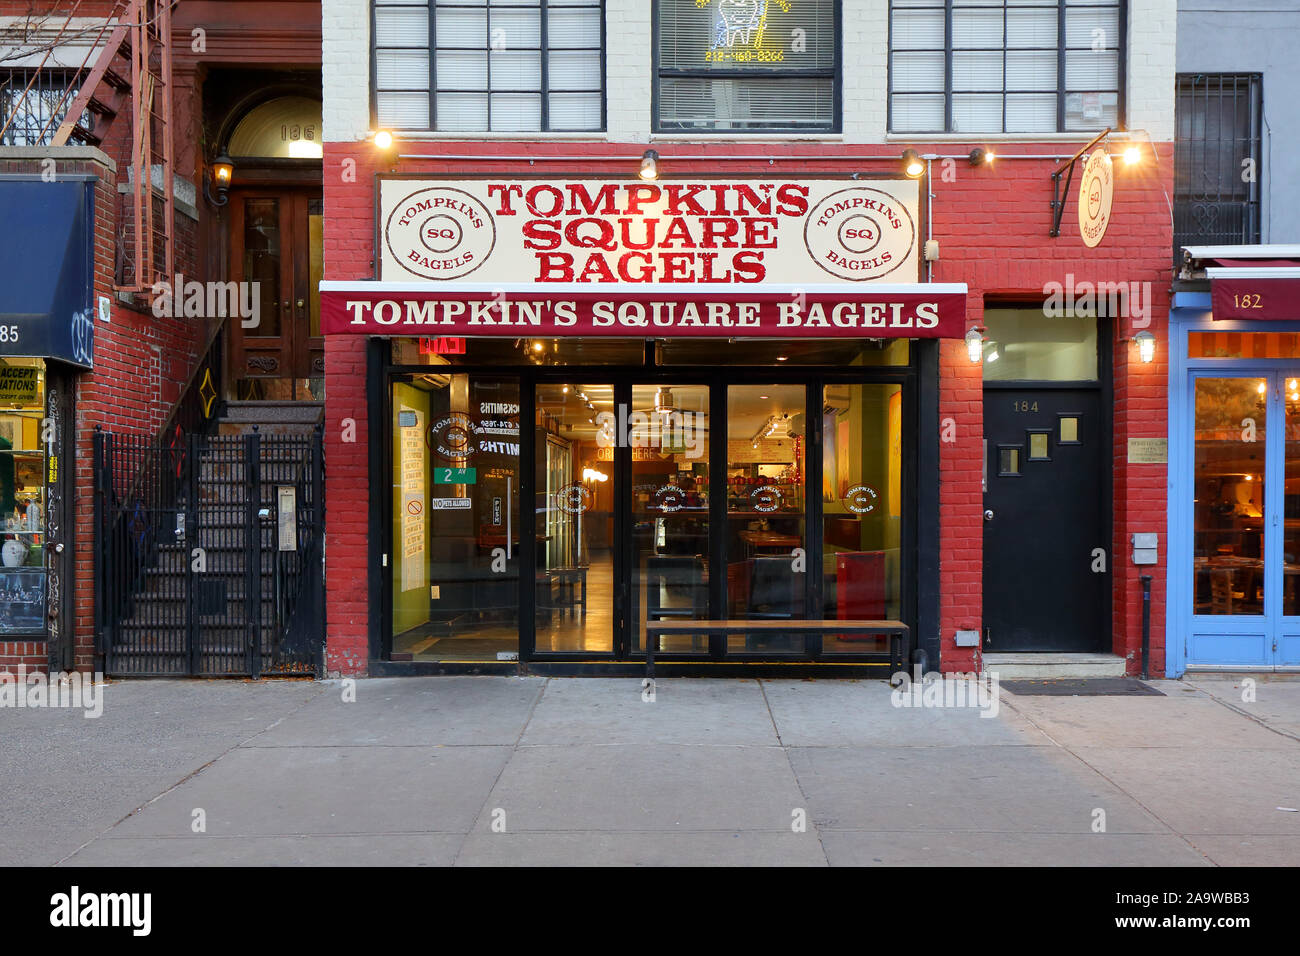 Tompkins Square Bagels, 184 2nd Ave, New York, NY. exterior storefront of a bagelry in the East Village neighborhood of Manhattan. Stock Photo